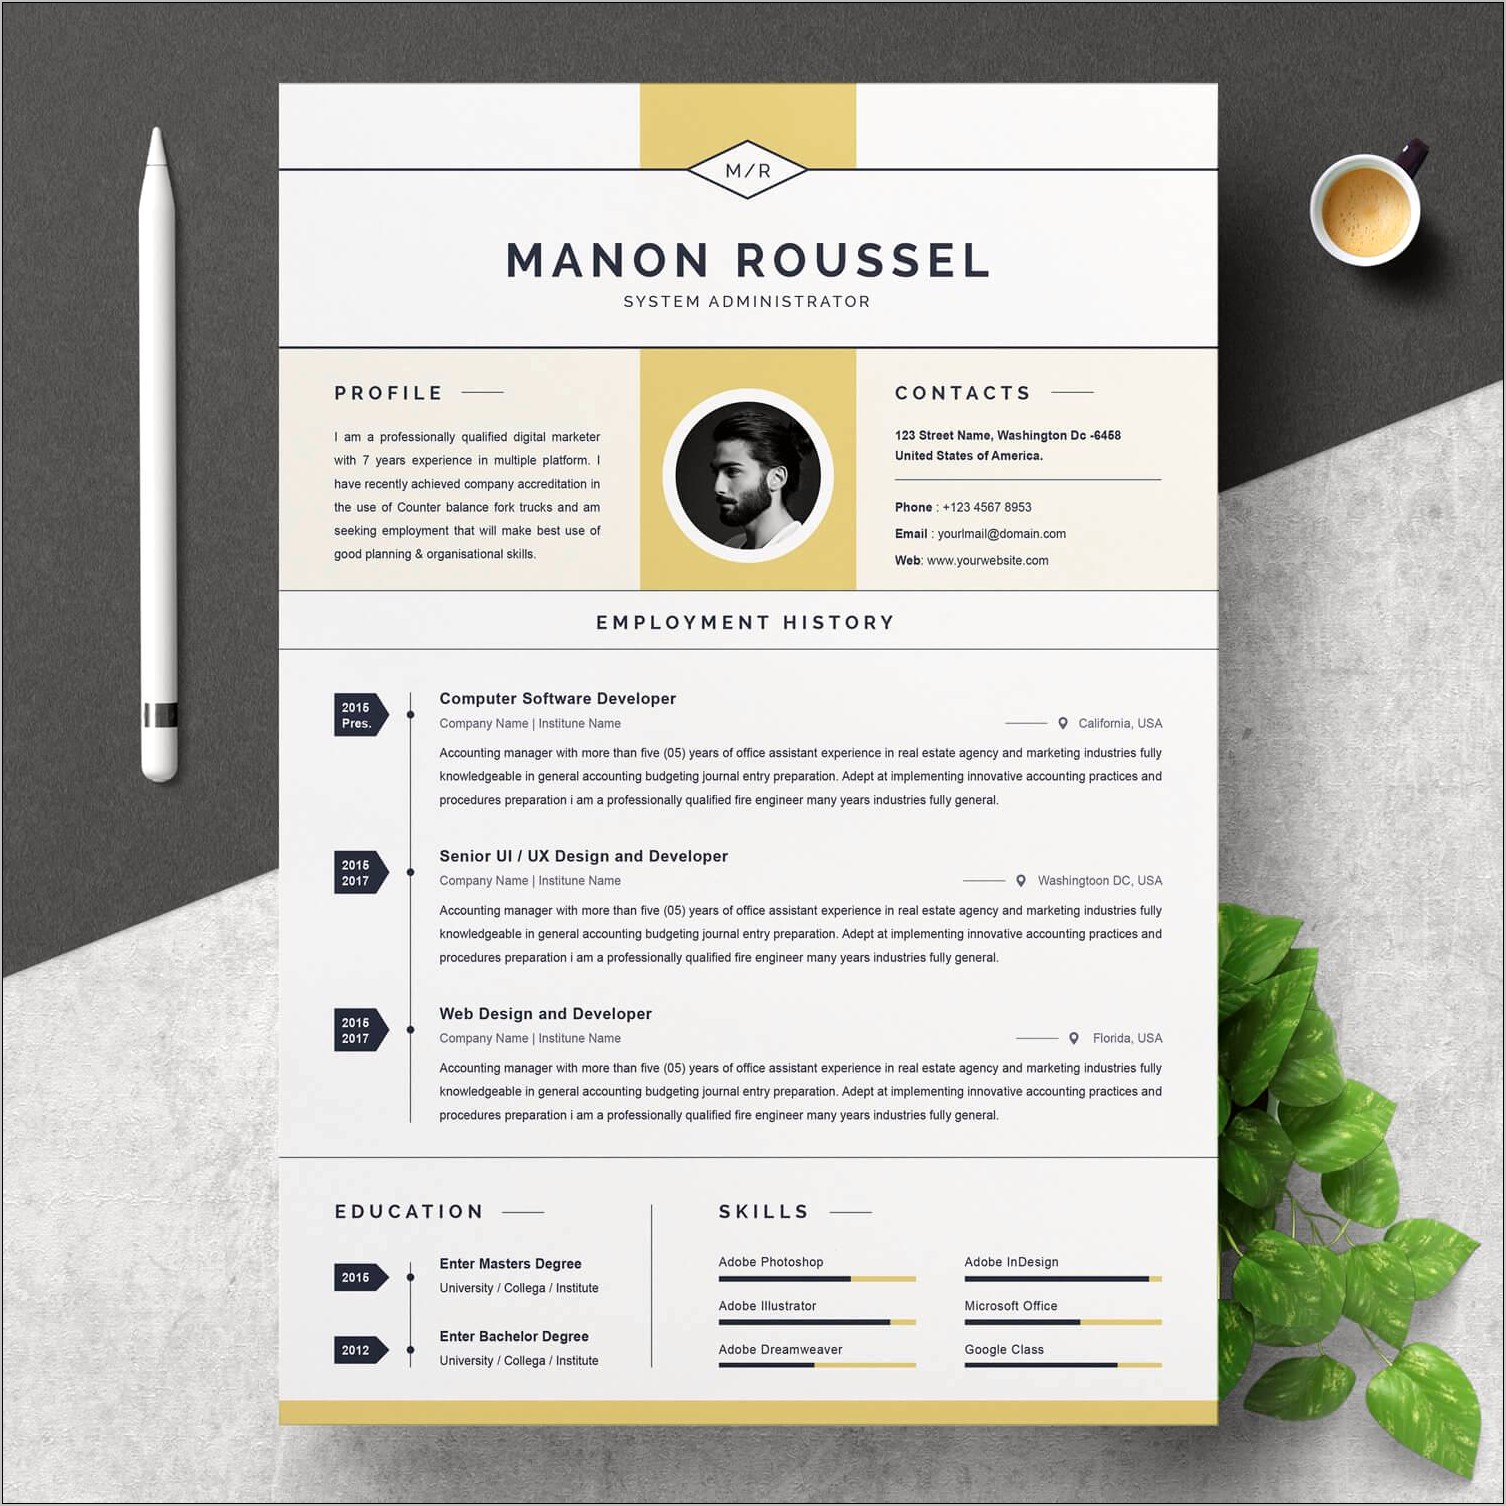 Free Office Administrator Resume Templates